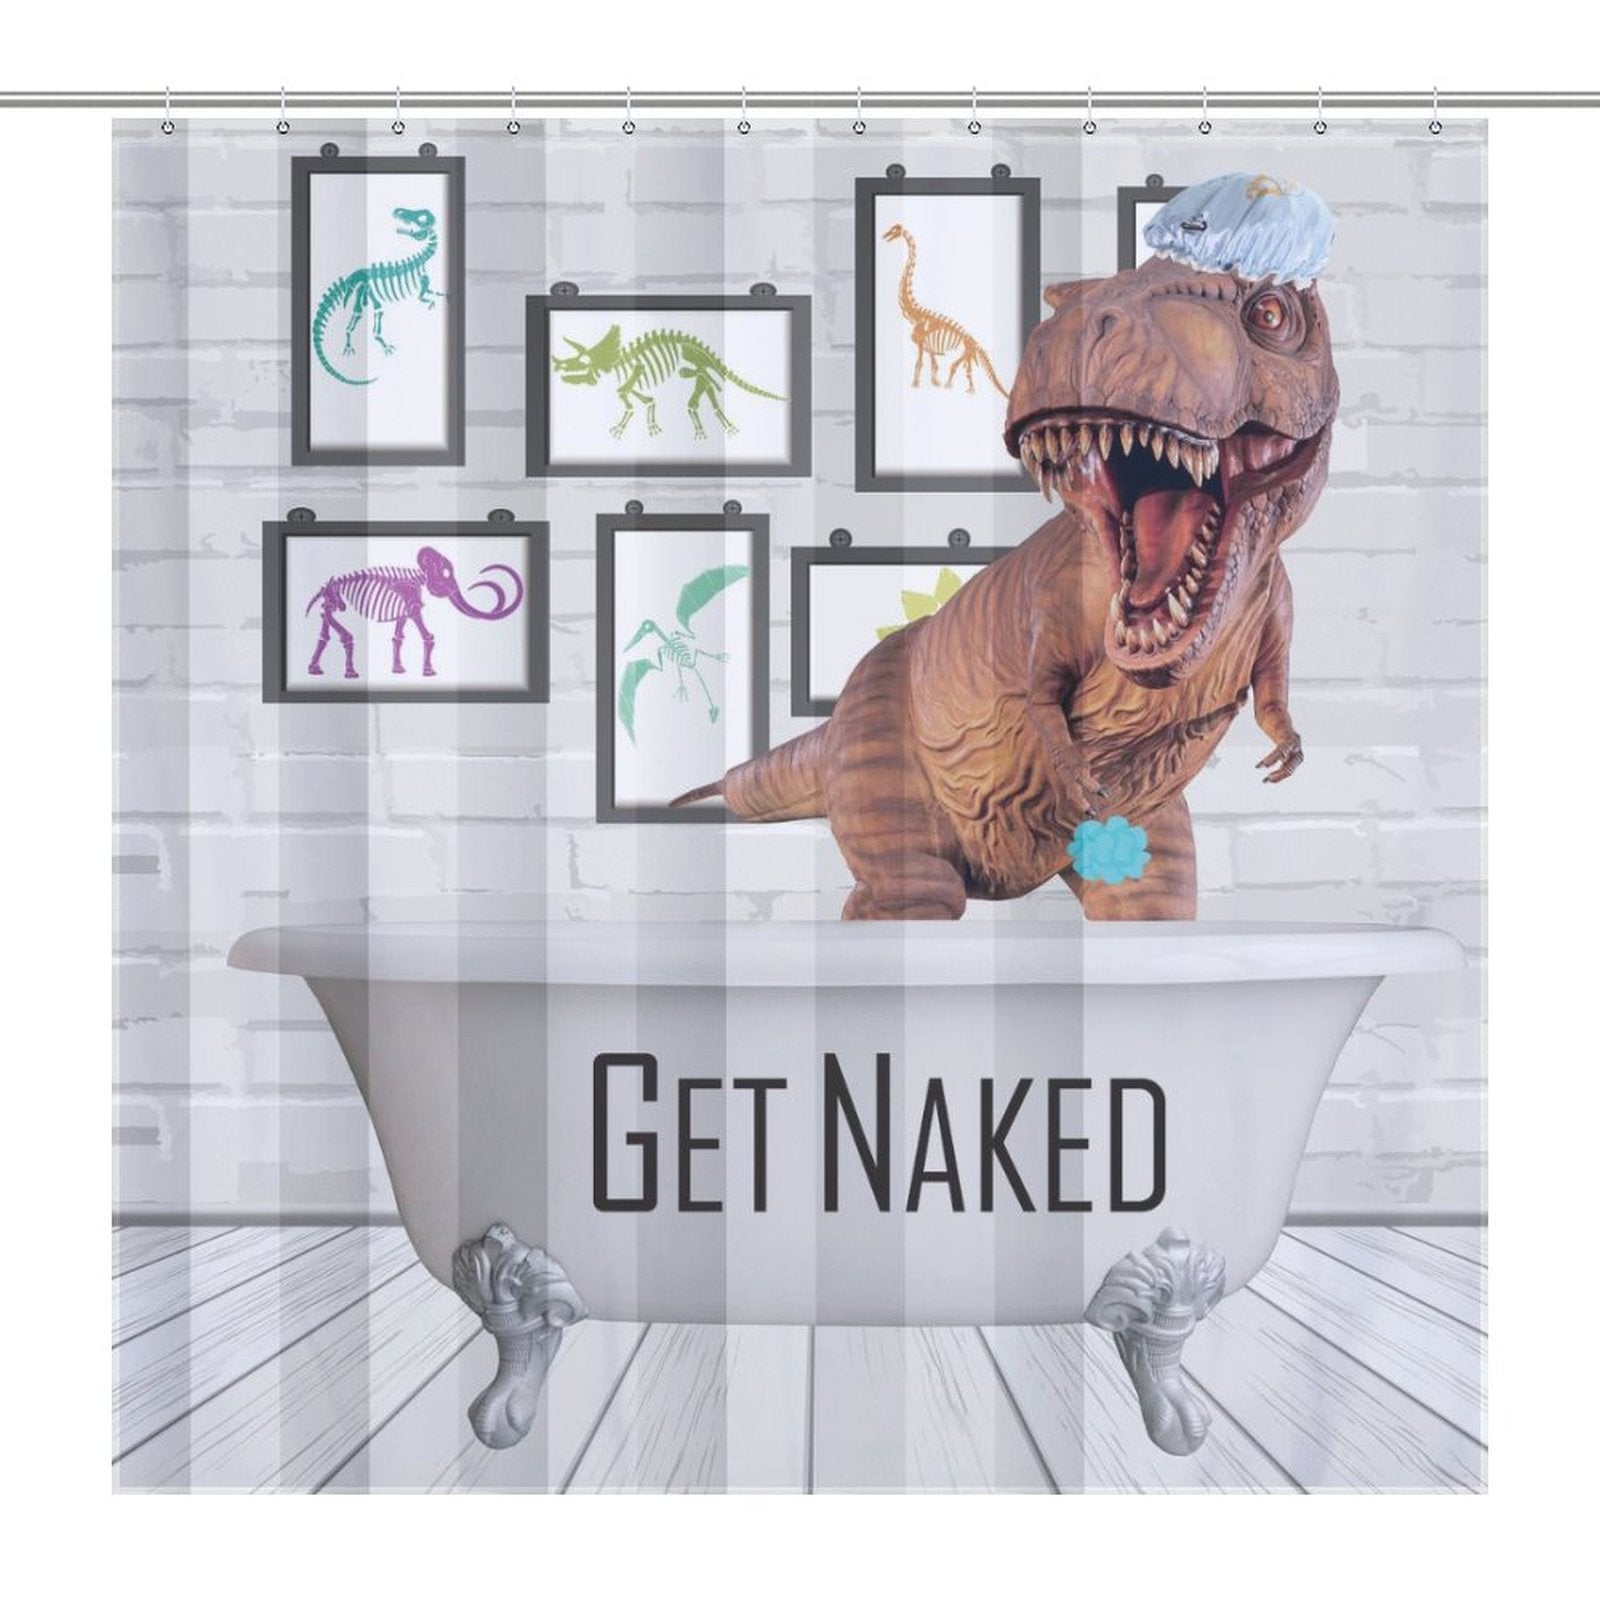 This Funny Dinosaur Get Naked Shower Curtain-Cottoncat features a playful design of a cartoon dinosaur in a bathtub, wearing a shower cap. With the humorous text "Get Naked" and framed dinosaur pictures in the background, it's perfect for adding a touch of whimsy to your Dinosaur Bathroom Decor by Cotton Cat.